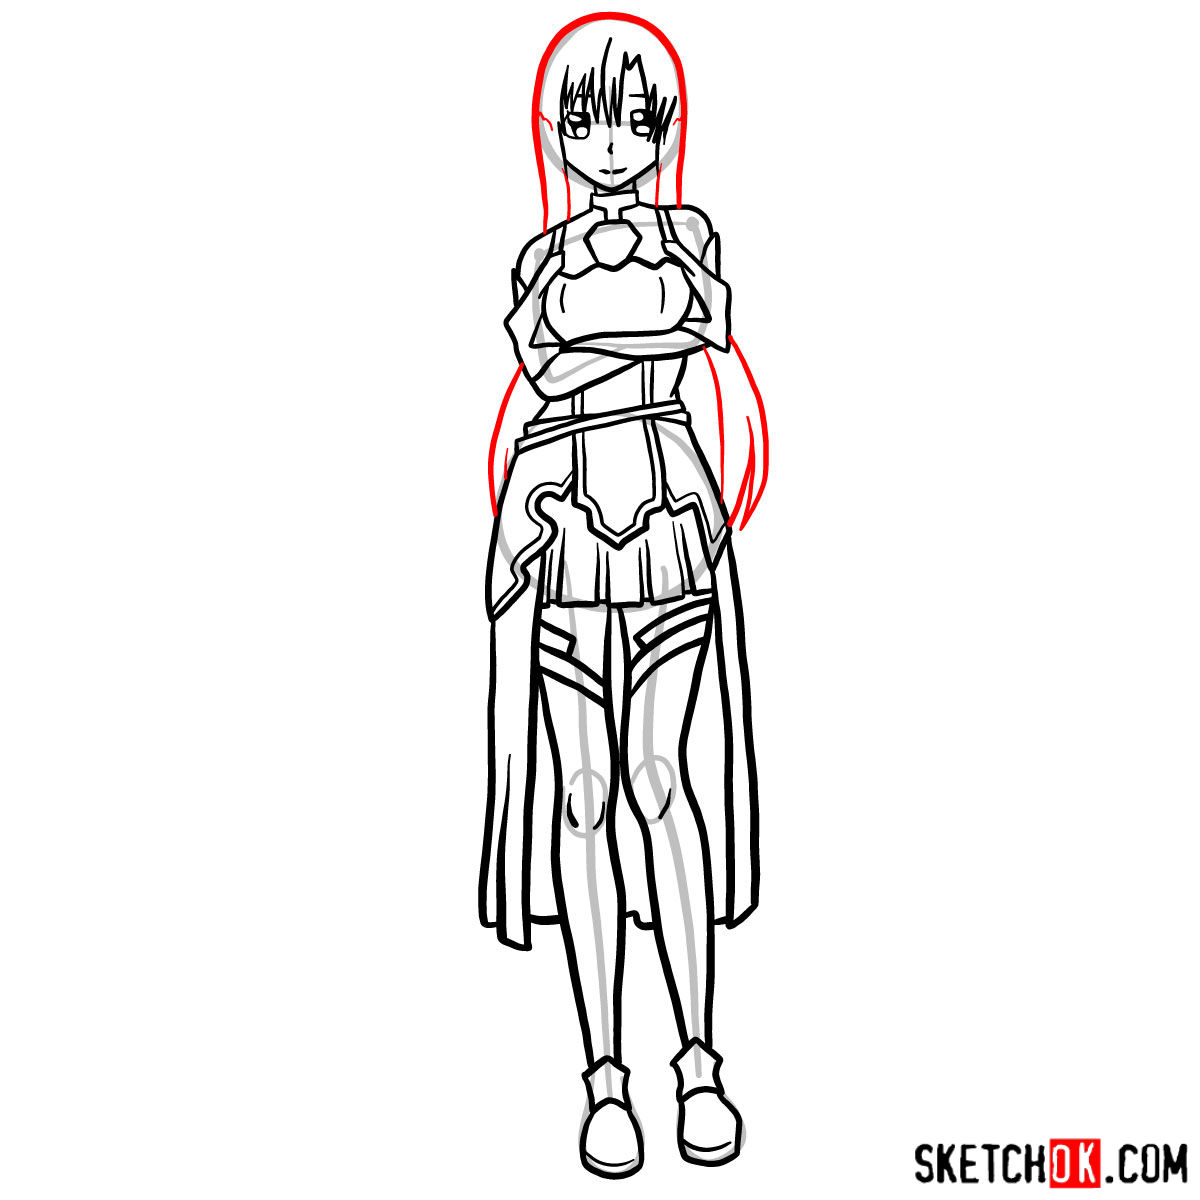 How to draw Yuuki Asuna from Sword Art Online anime - step 16